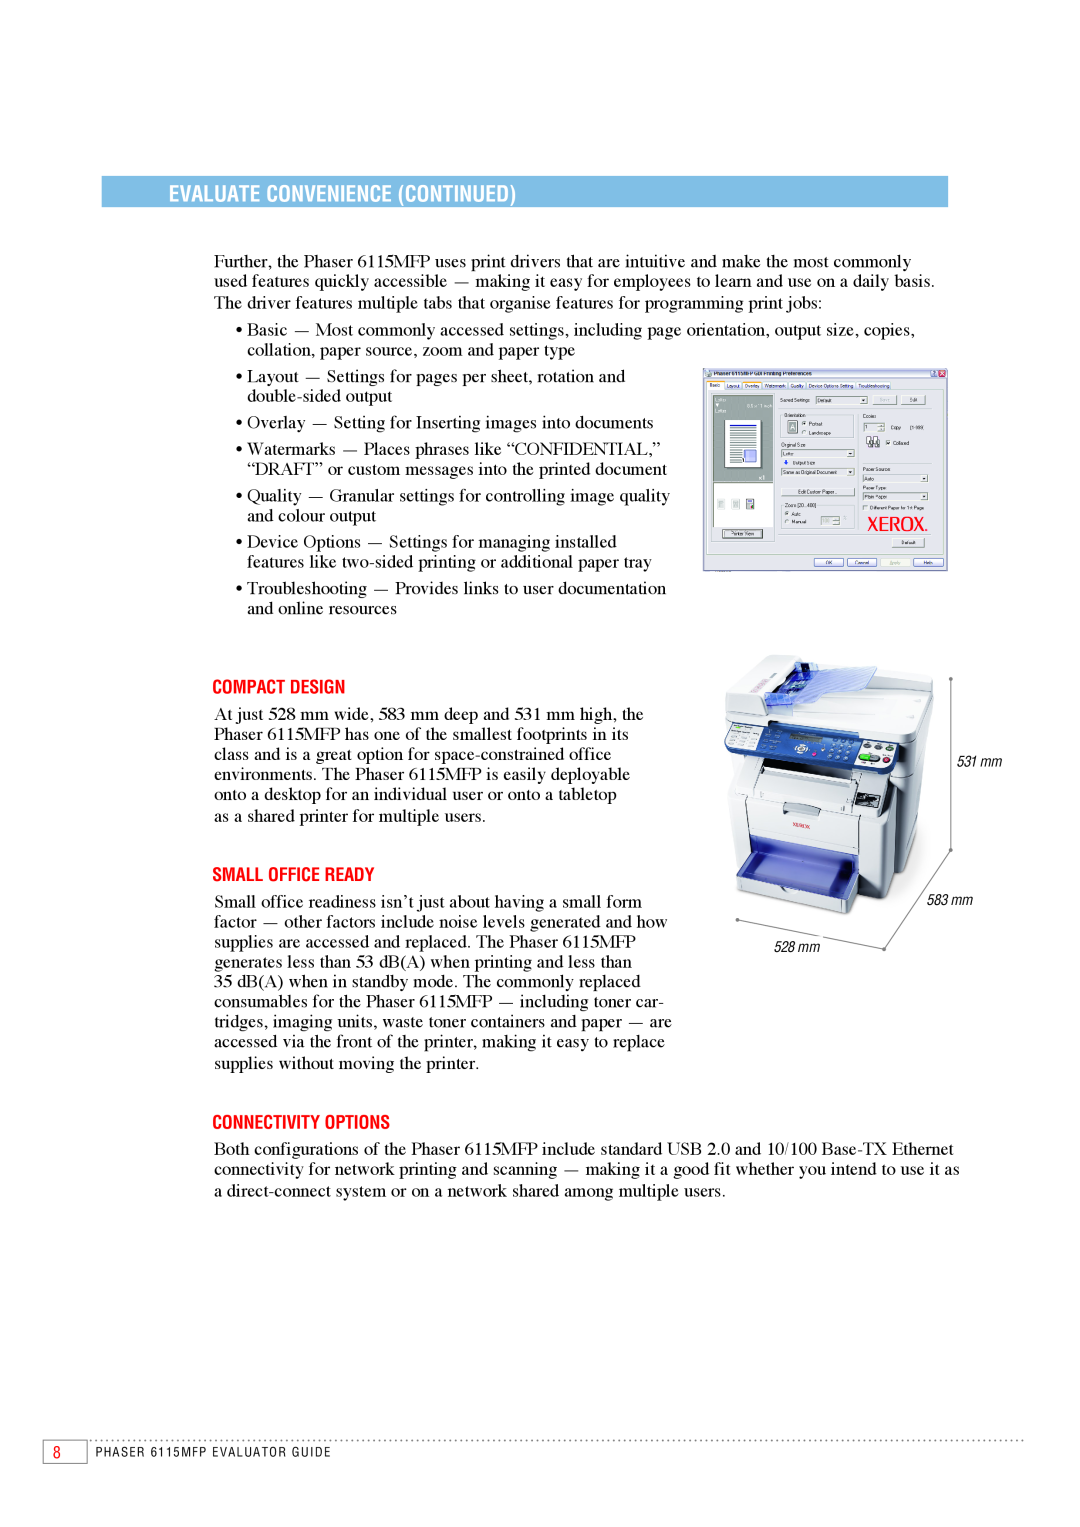 Xerox 6115MFP manual Evaluate Convenience Continued, Compact Design, Small Office Ready, Connectivity Options 